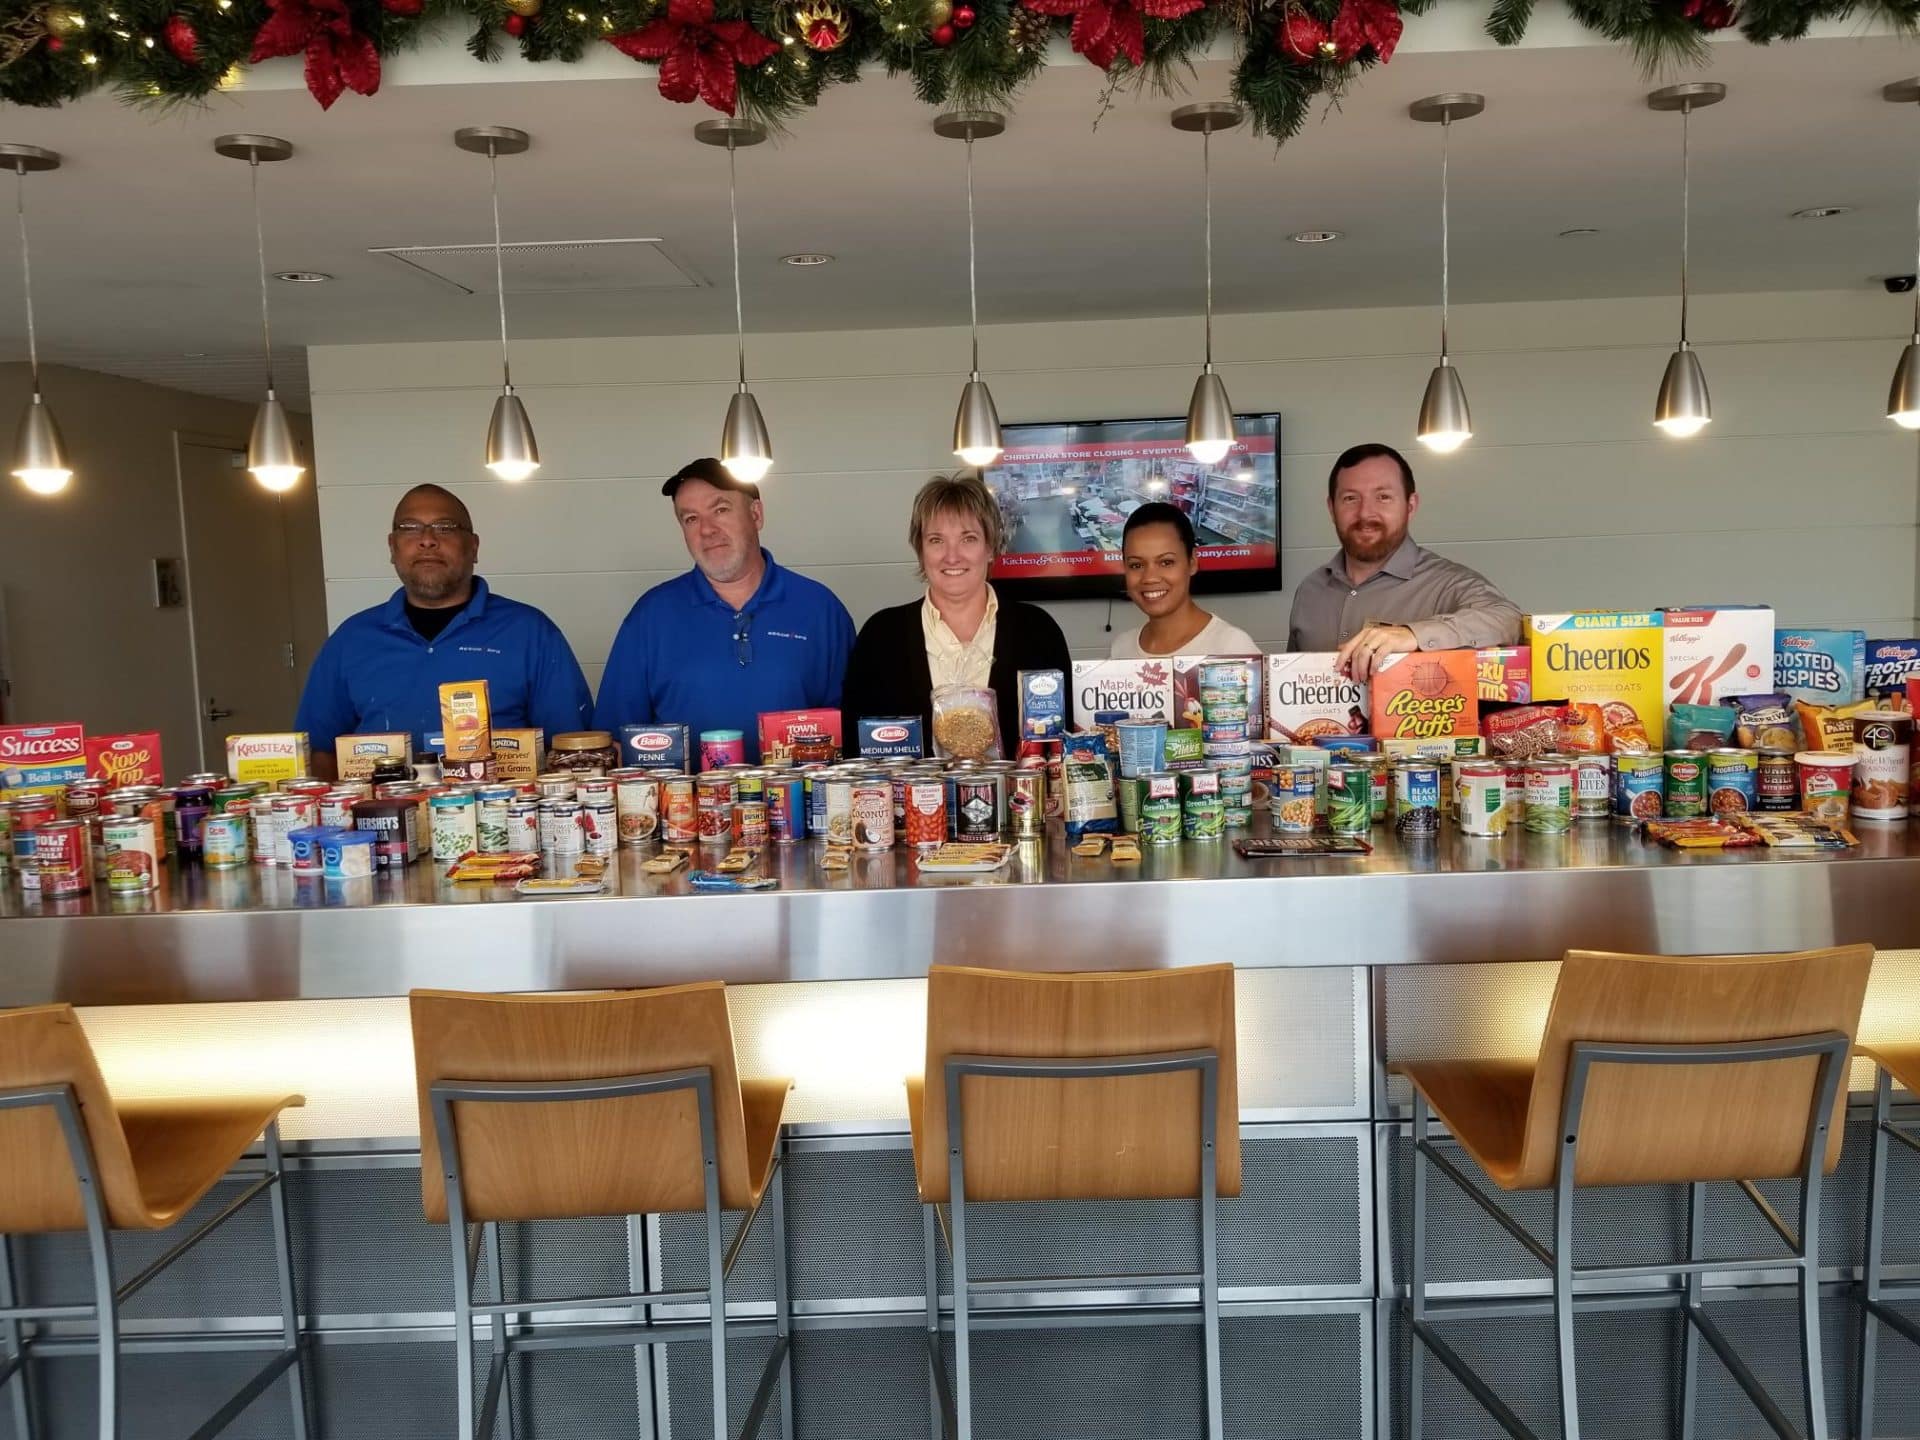 ResideBPG & BPG Raise 623 Pounds of Food for the Food Bank of Delaware